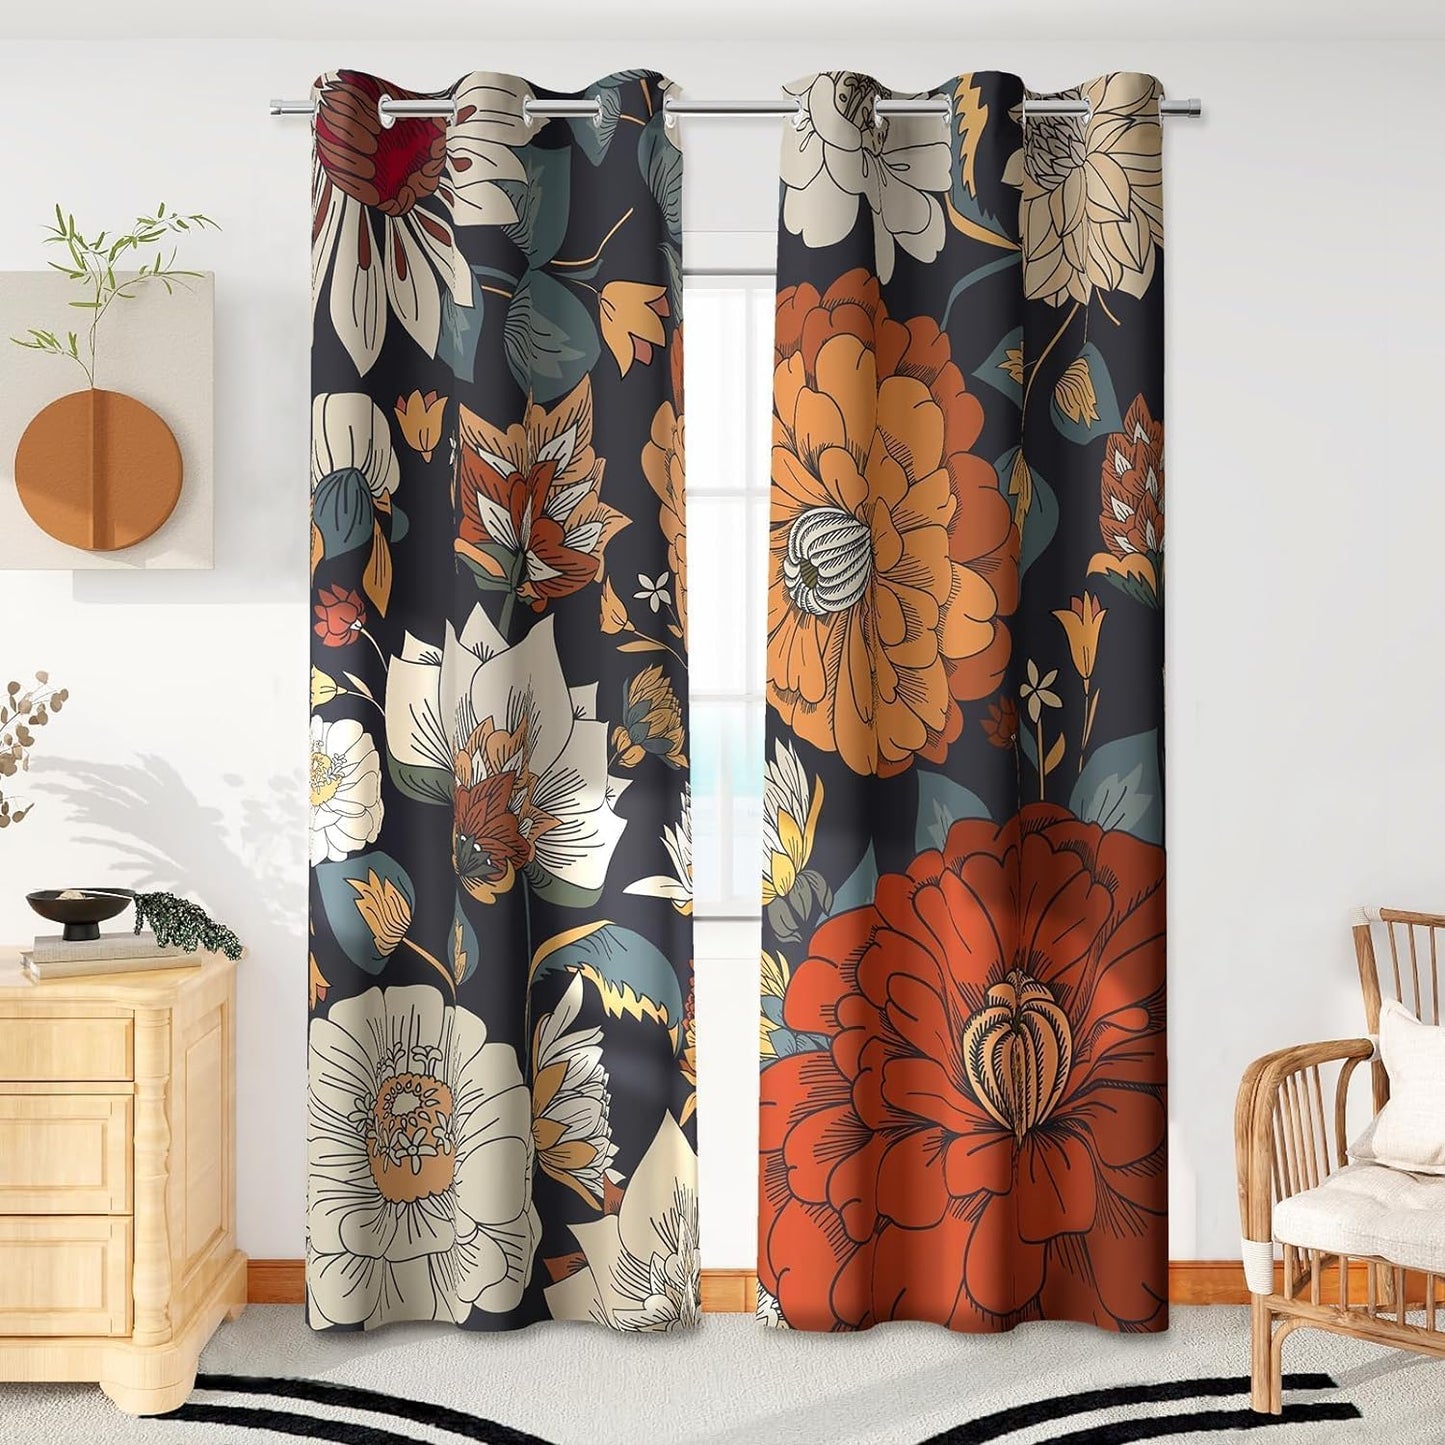 Boho Floral 100% Blackout Curtains for Living Room 96 Inch Long 2 Panels Mid Century Botanical Black Out Curtains for Bedroom Grommet Thermal Insulated Room Darkening Window Drapes,52Wx96L  Tyrot Boho Floral 42W X 63L Inch X 2 Panels 